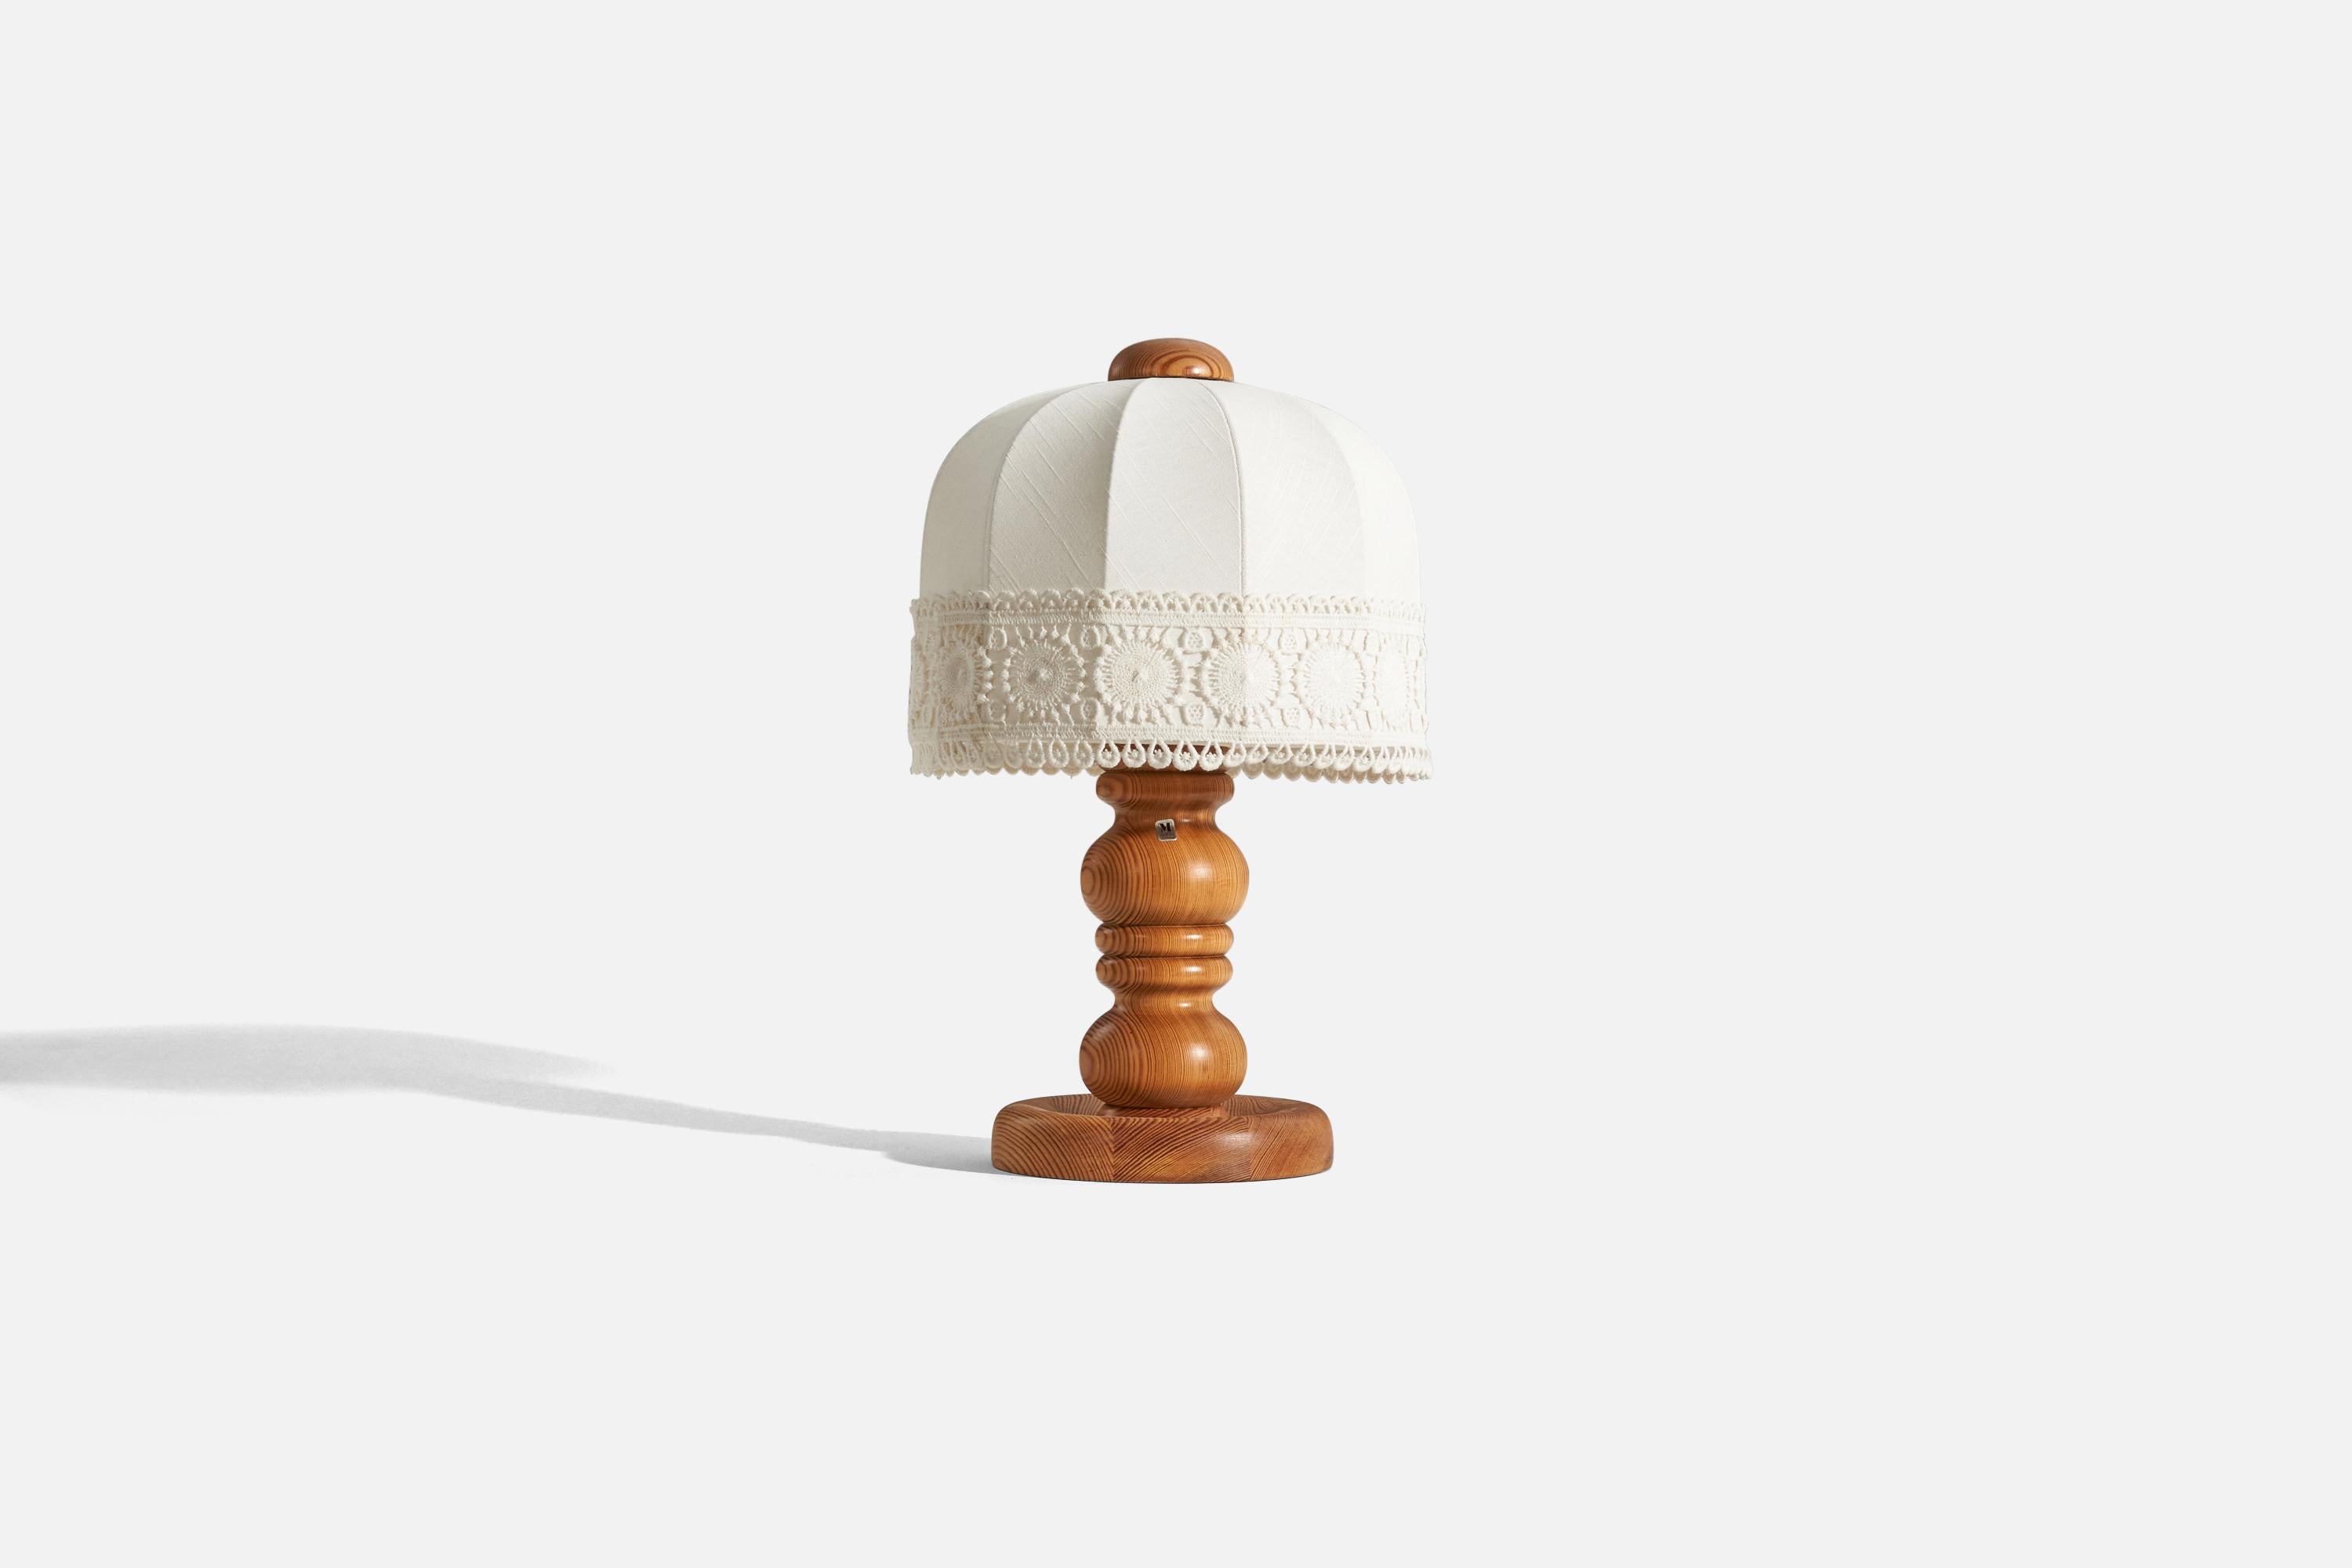 A solid pine table lamp designed and produced in Sweden, c. 1970s.

Sold with lampshade. 
Dimensions of lamp (inches) : 11.125 x 7.0625 x 7.0625 (H x W x D)
Dimensions of shade (inches) : 10 x 10.5 x 8.25 (T x B x H)
Dimension of lamp with